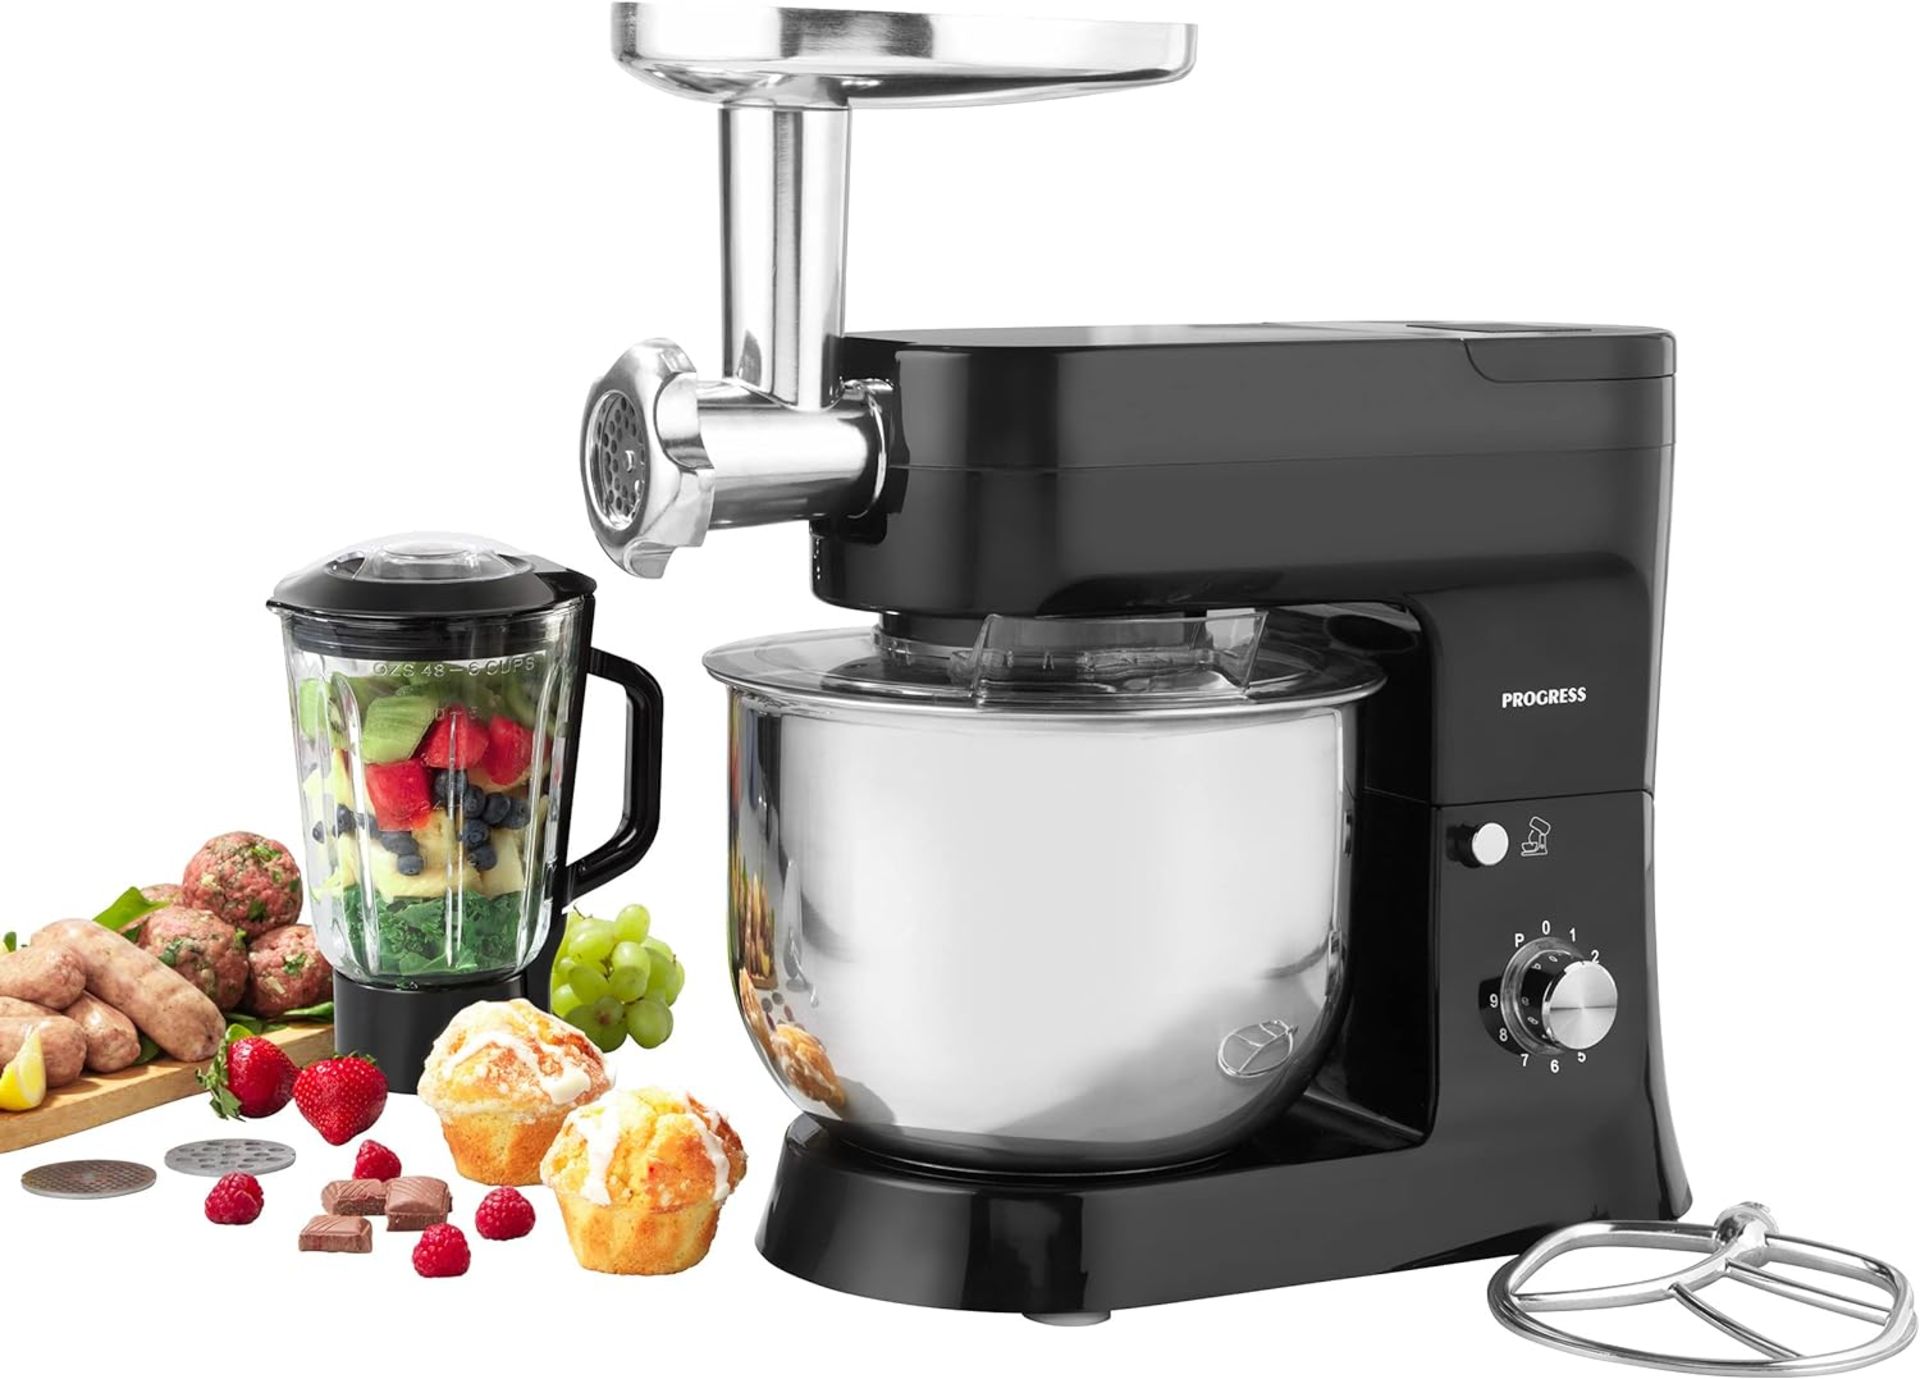 BRAND NEW PROGRESS 3 IN 1 STAND MIXER SETS R6.3